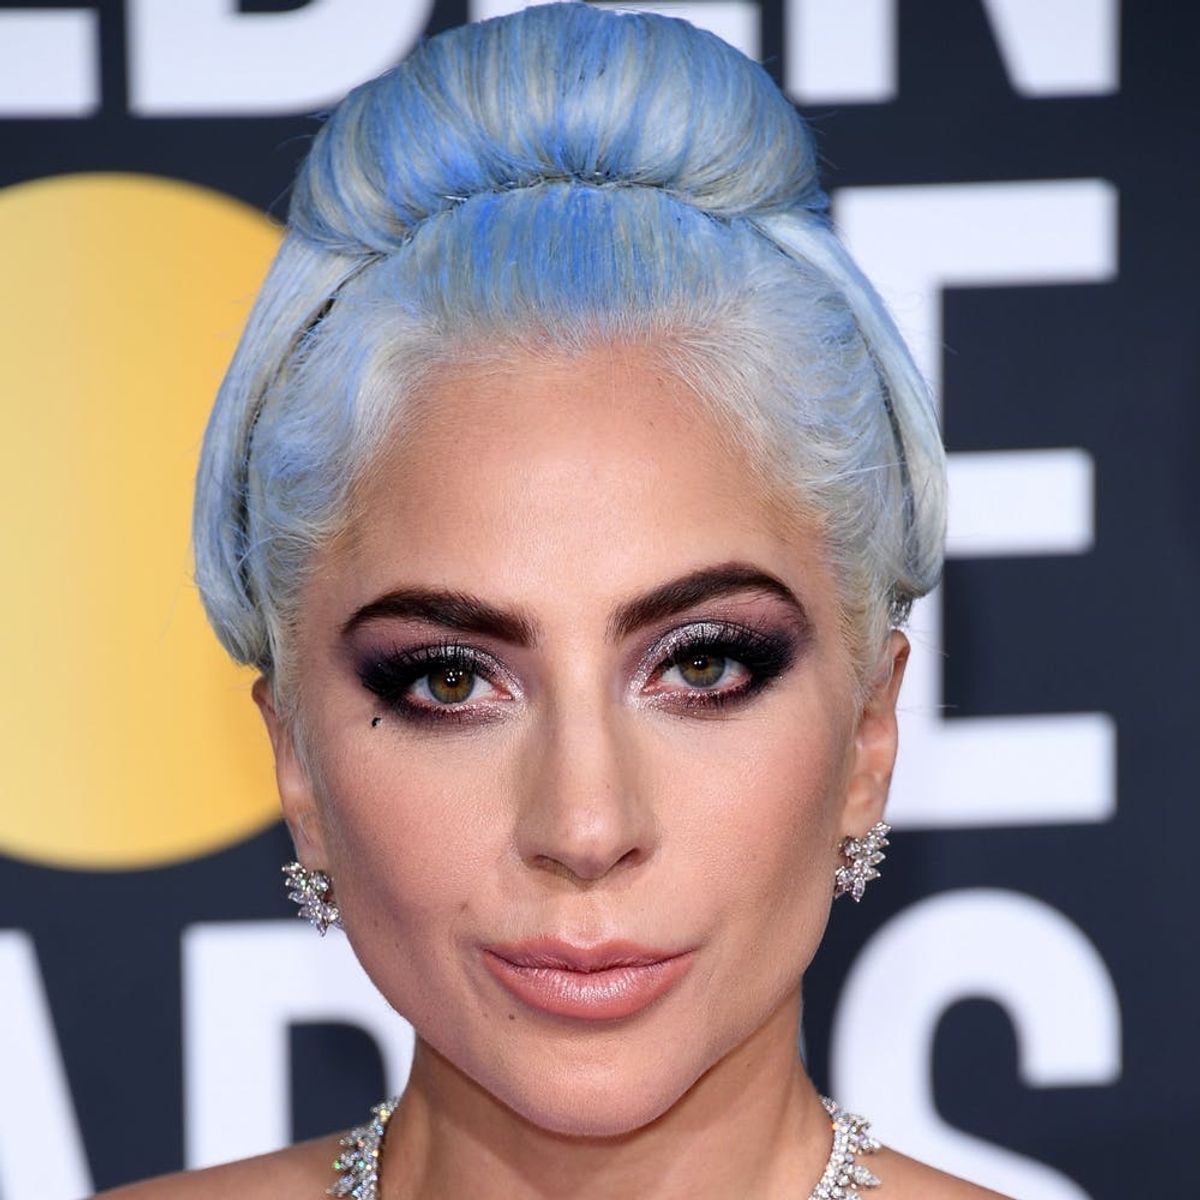 Find Out Exactly How Lady Gaga Matched Her Hair to Her Golden Globes Dress